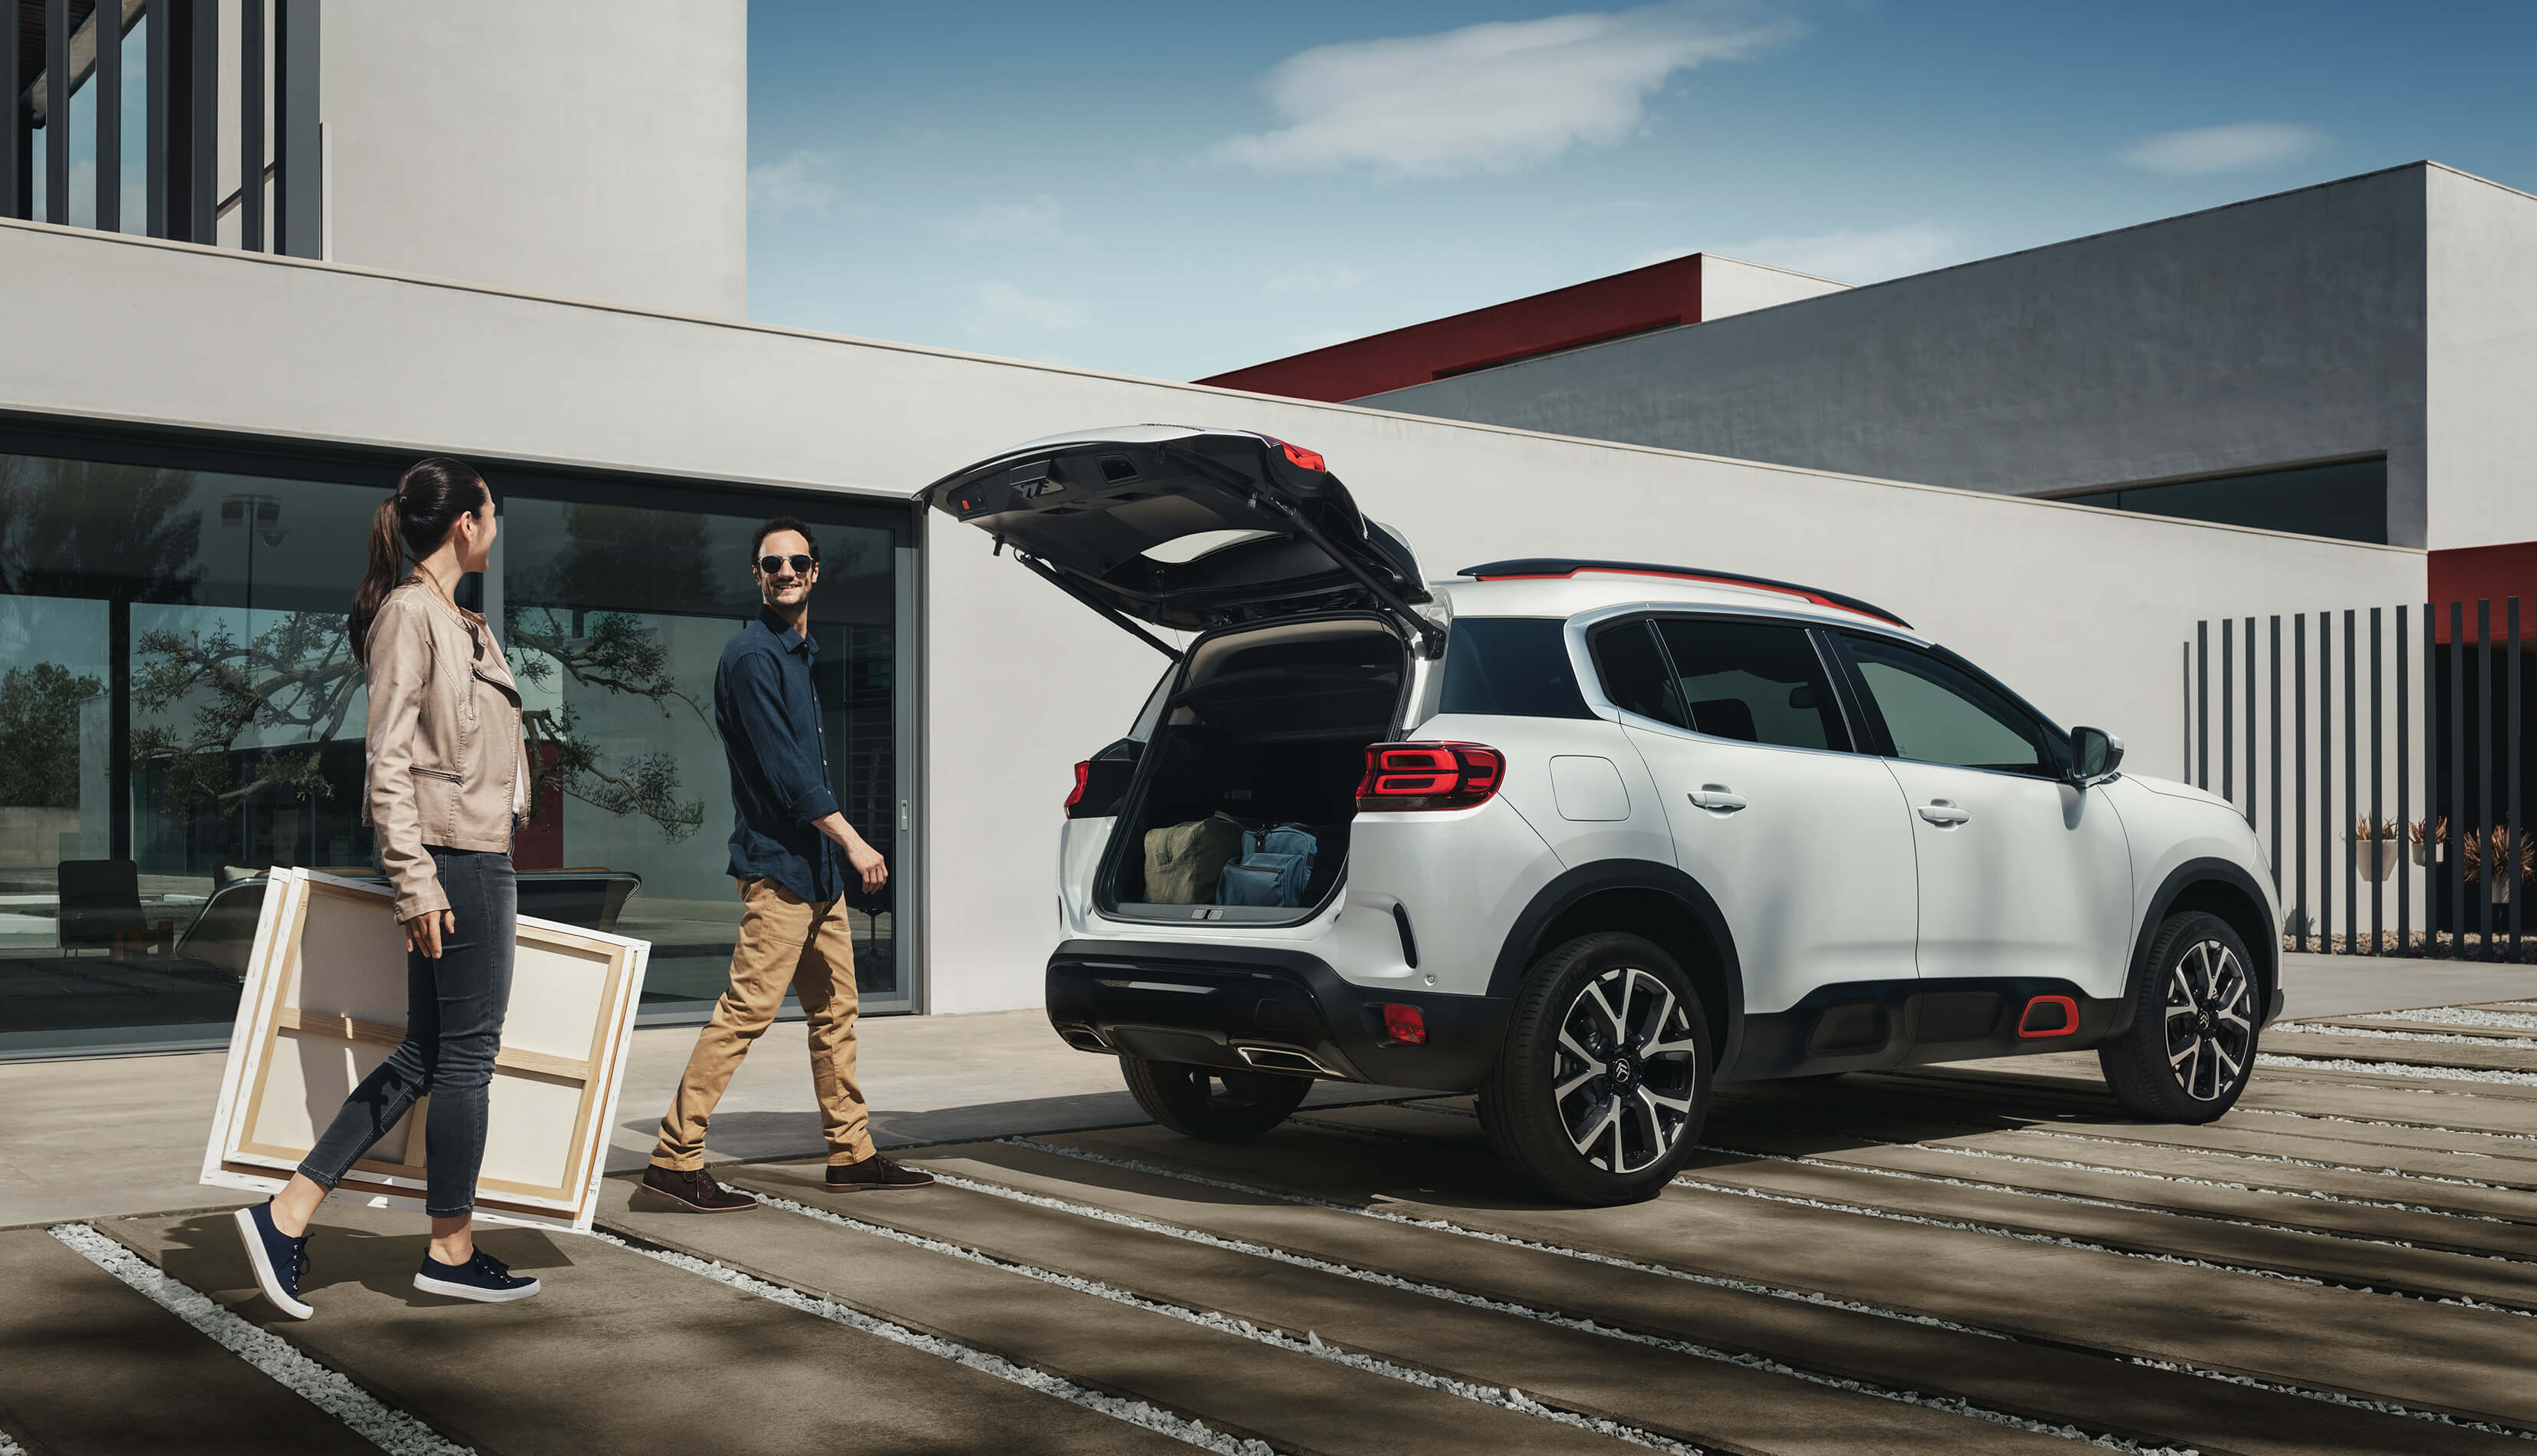 , Test: Citroën C5 Aircross 2019, Travelguide.at